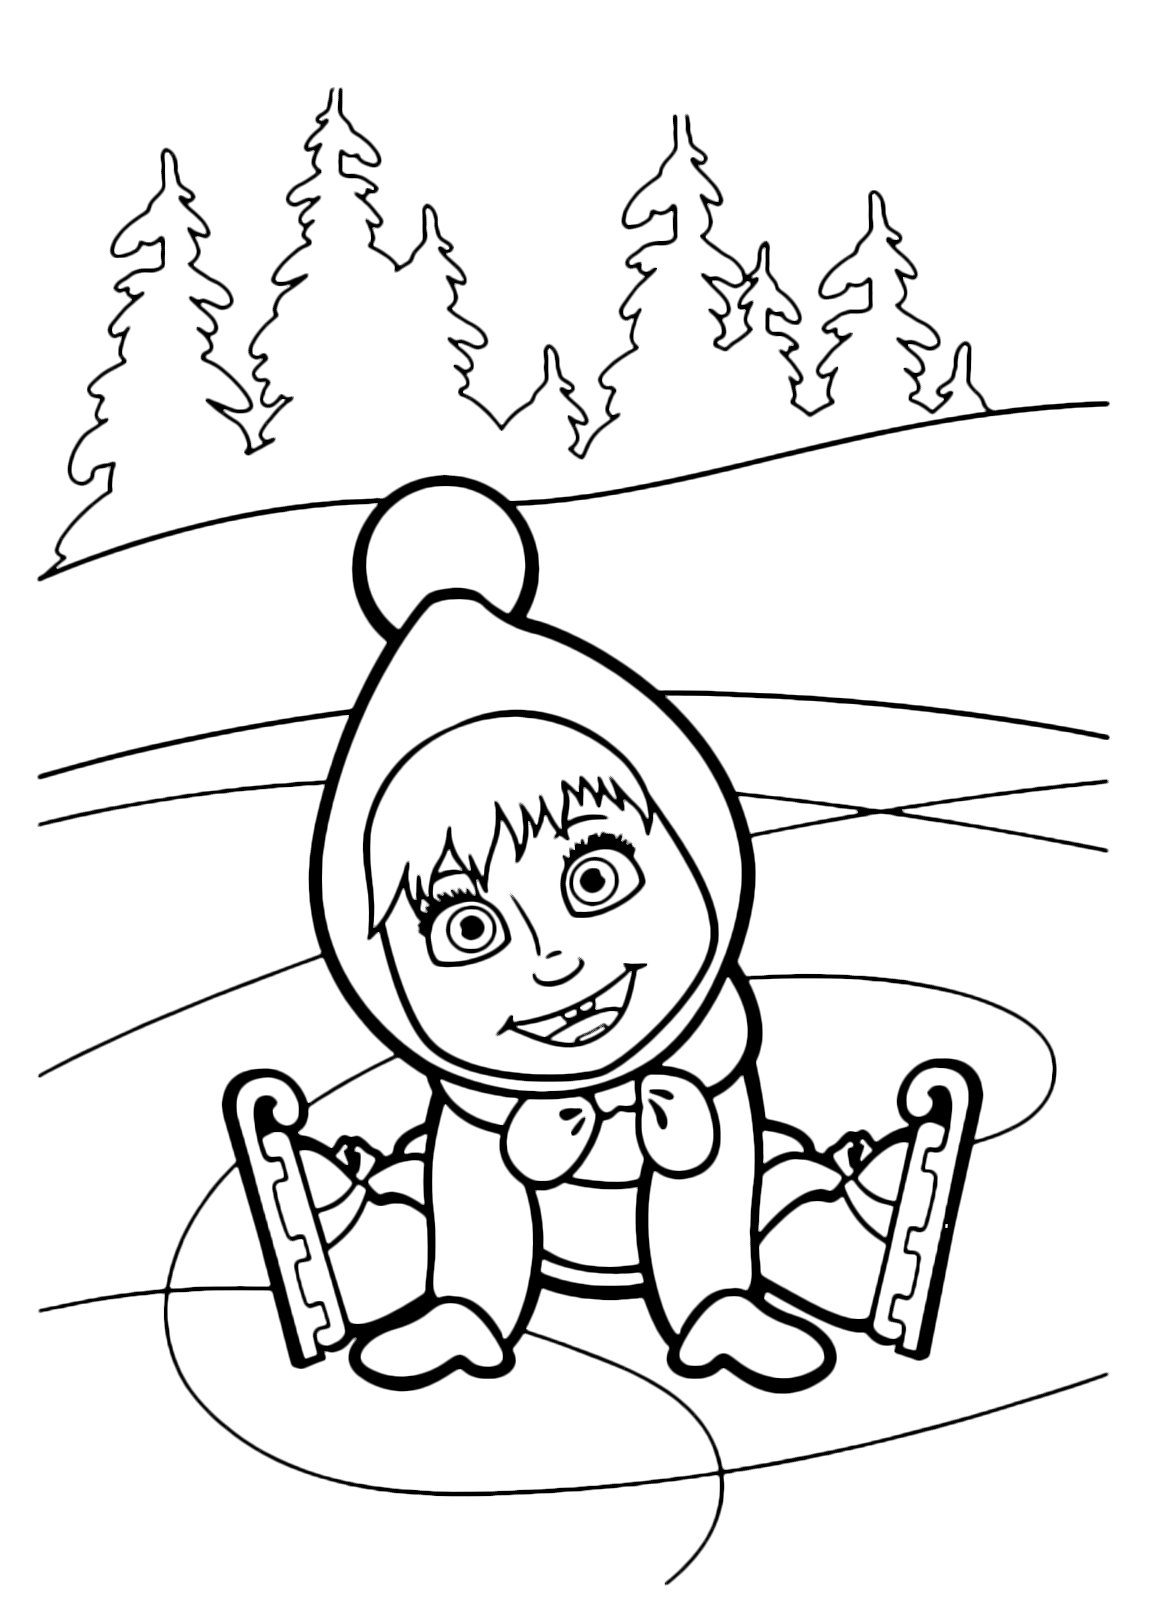 Masha And The Bear Coloring Pages at GetColoringscom